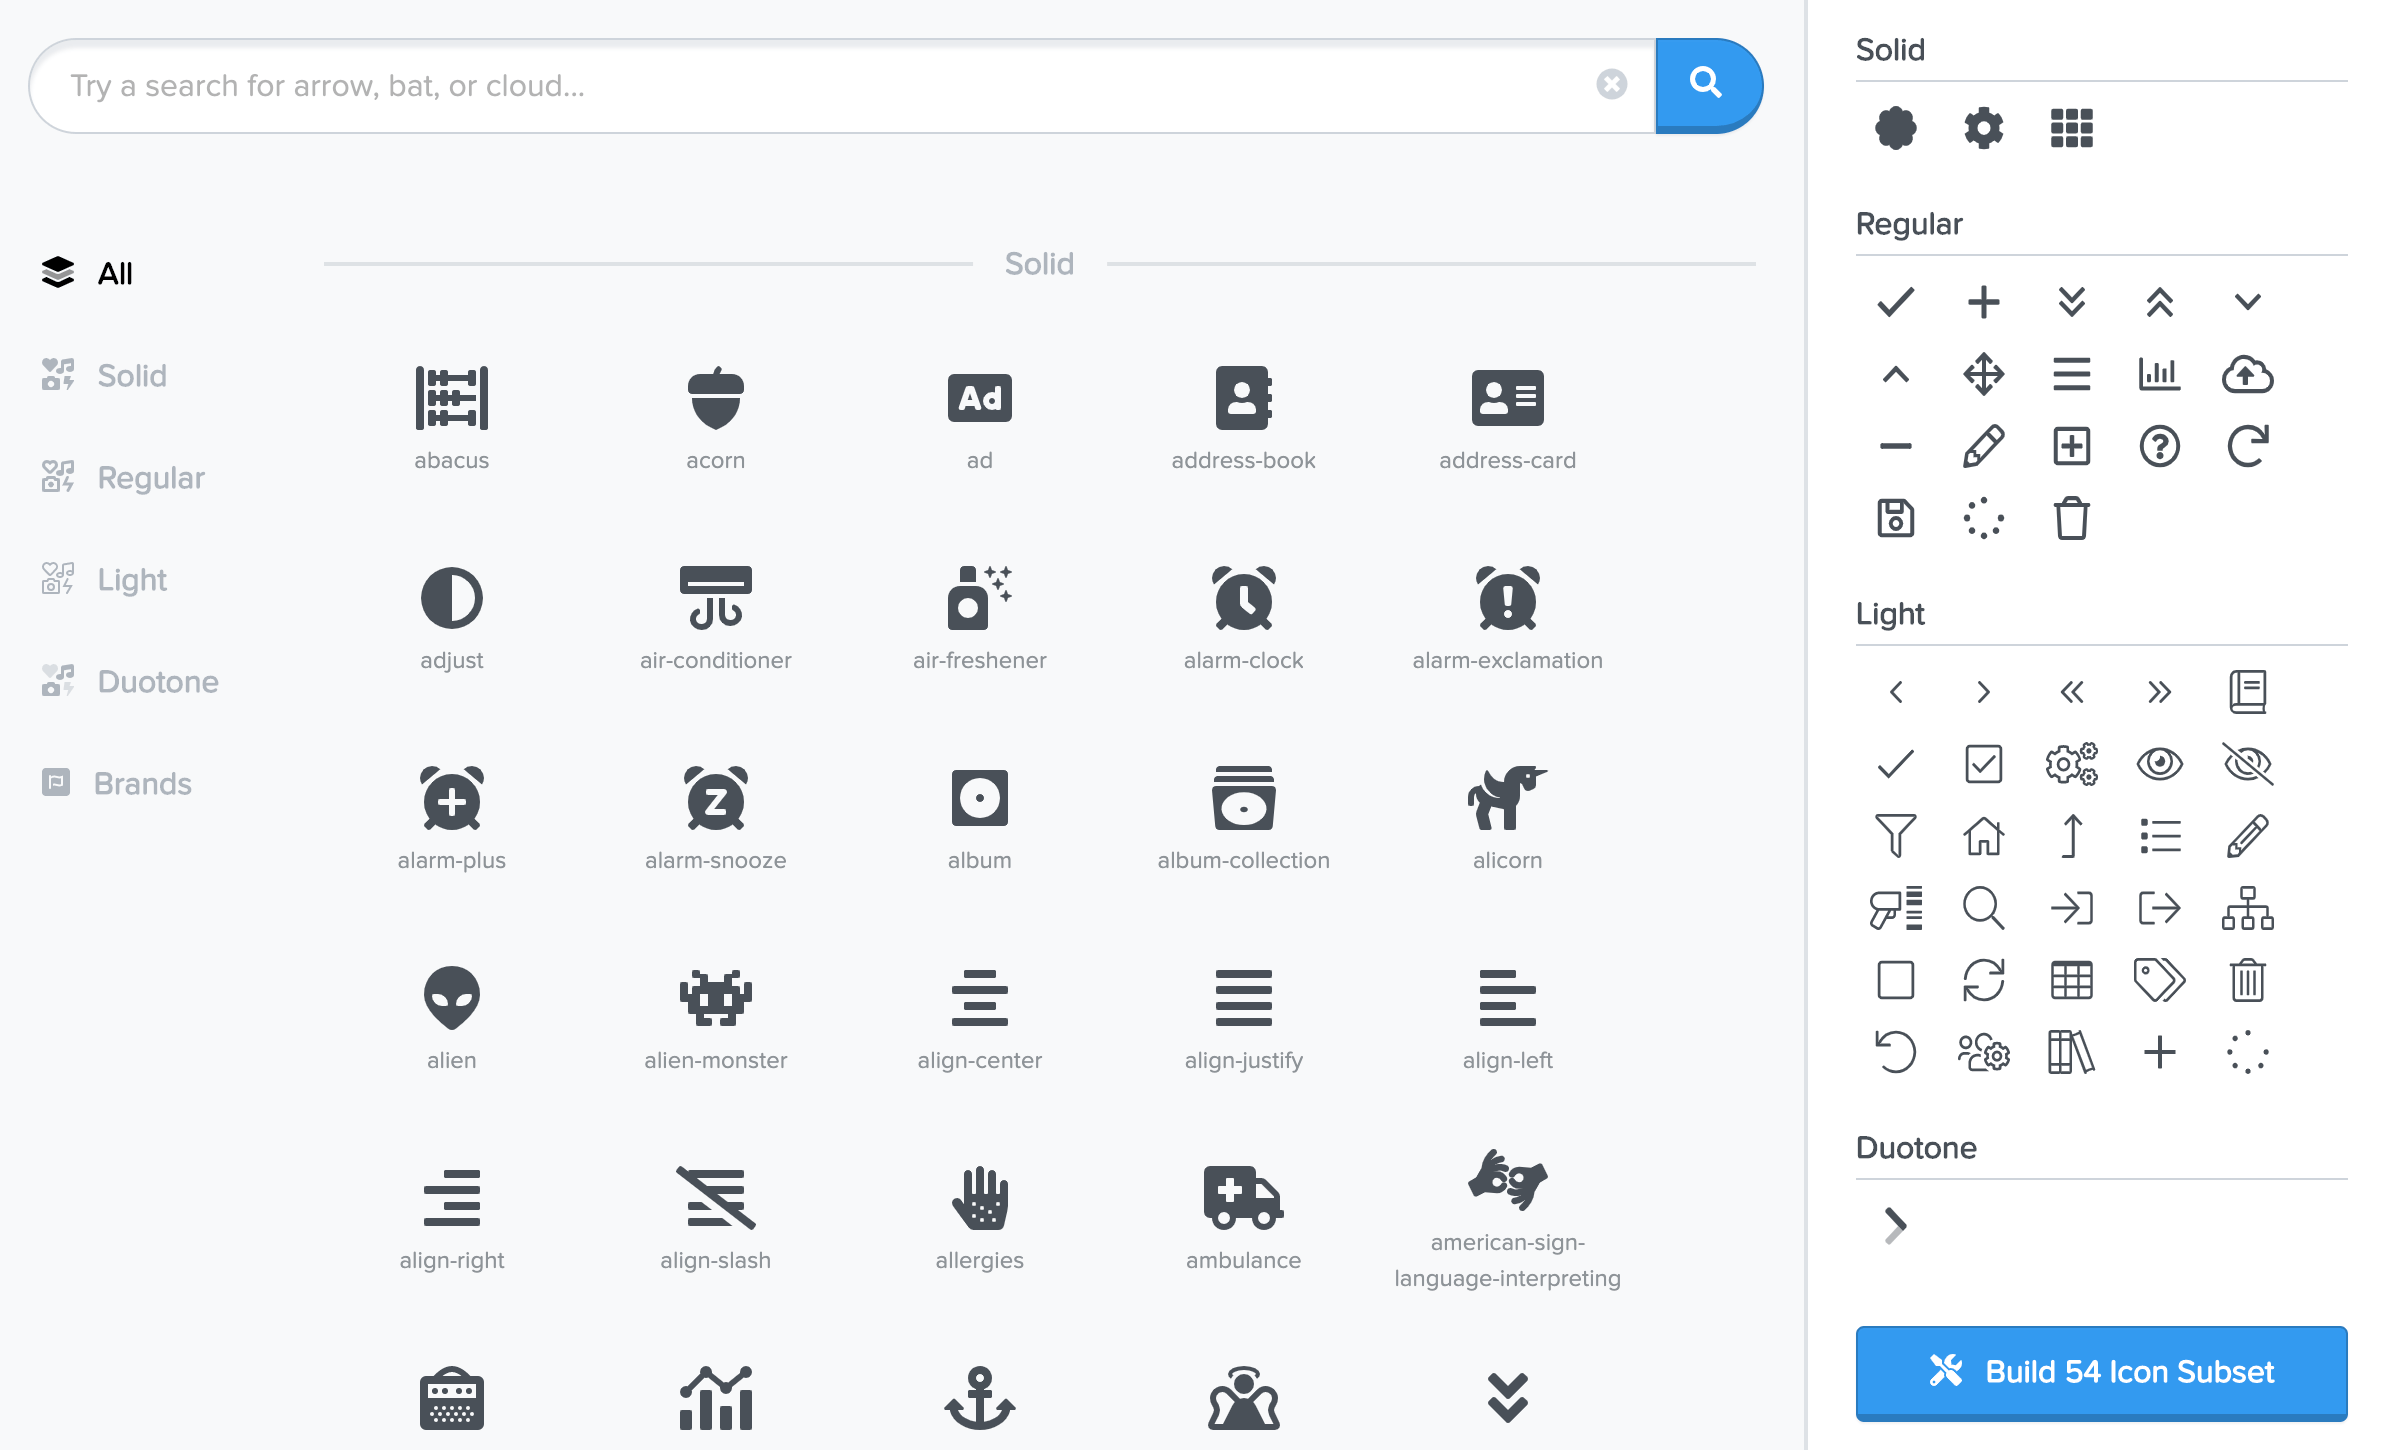 Screenshot of the Font Awesome desktop app. Icons are displayed as tiles in a grid layout.